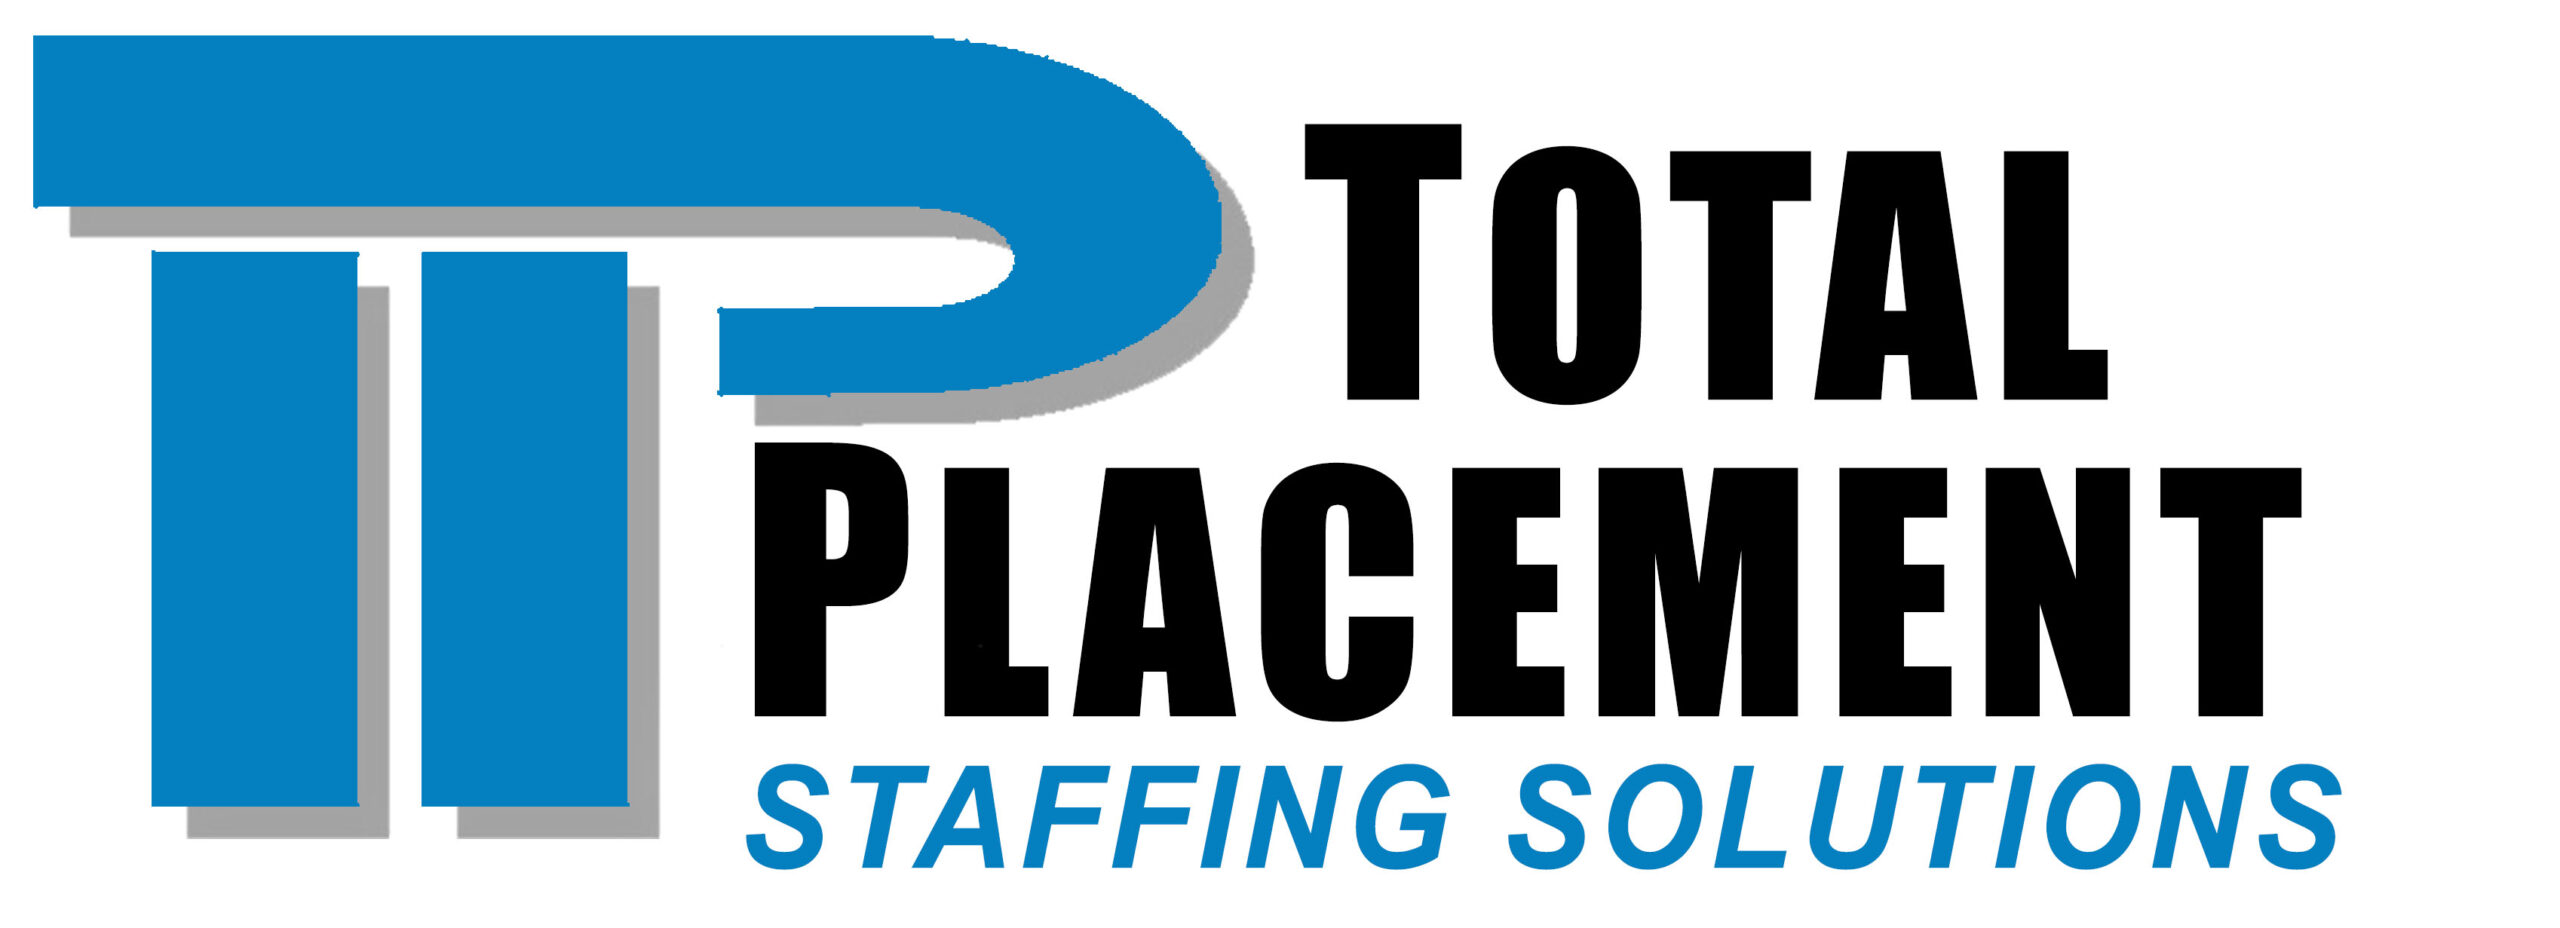 Total Placement - Staffing Solutions